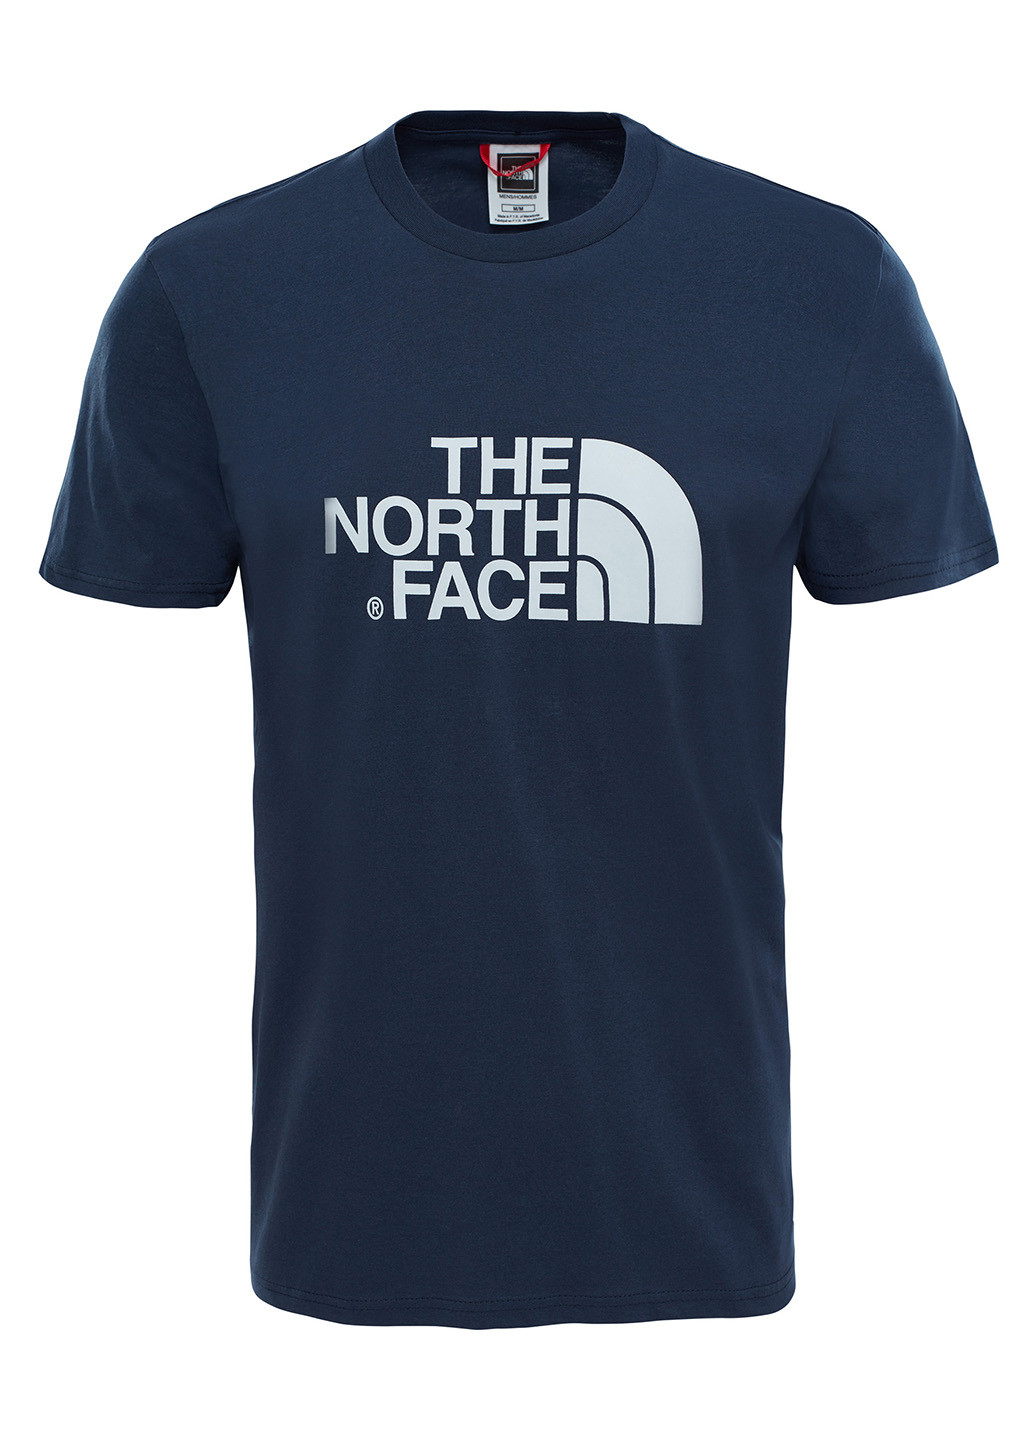 Чорна футболка The North Face